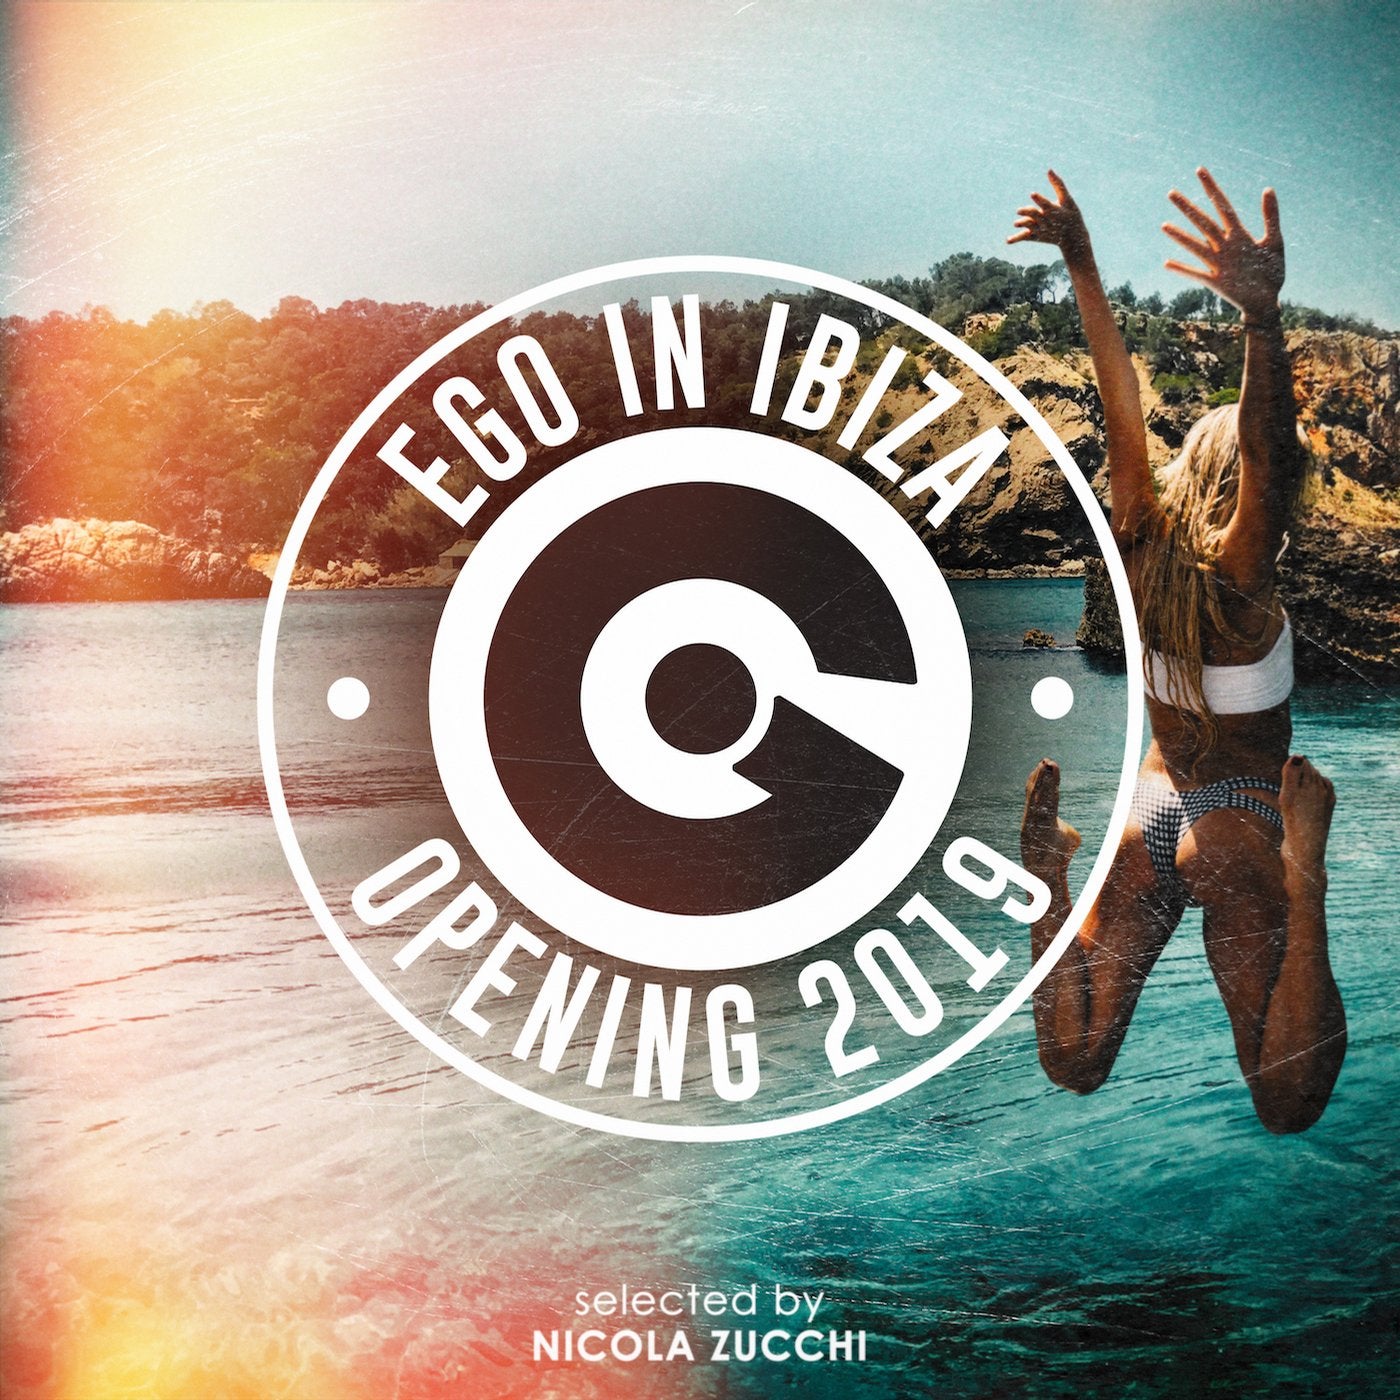 EGO IN IBIZA OPENING 2019 SELECTED BY NICOLA ZUCCHI